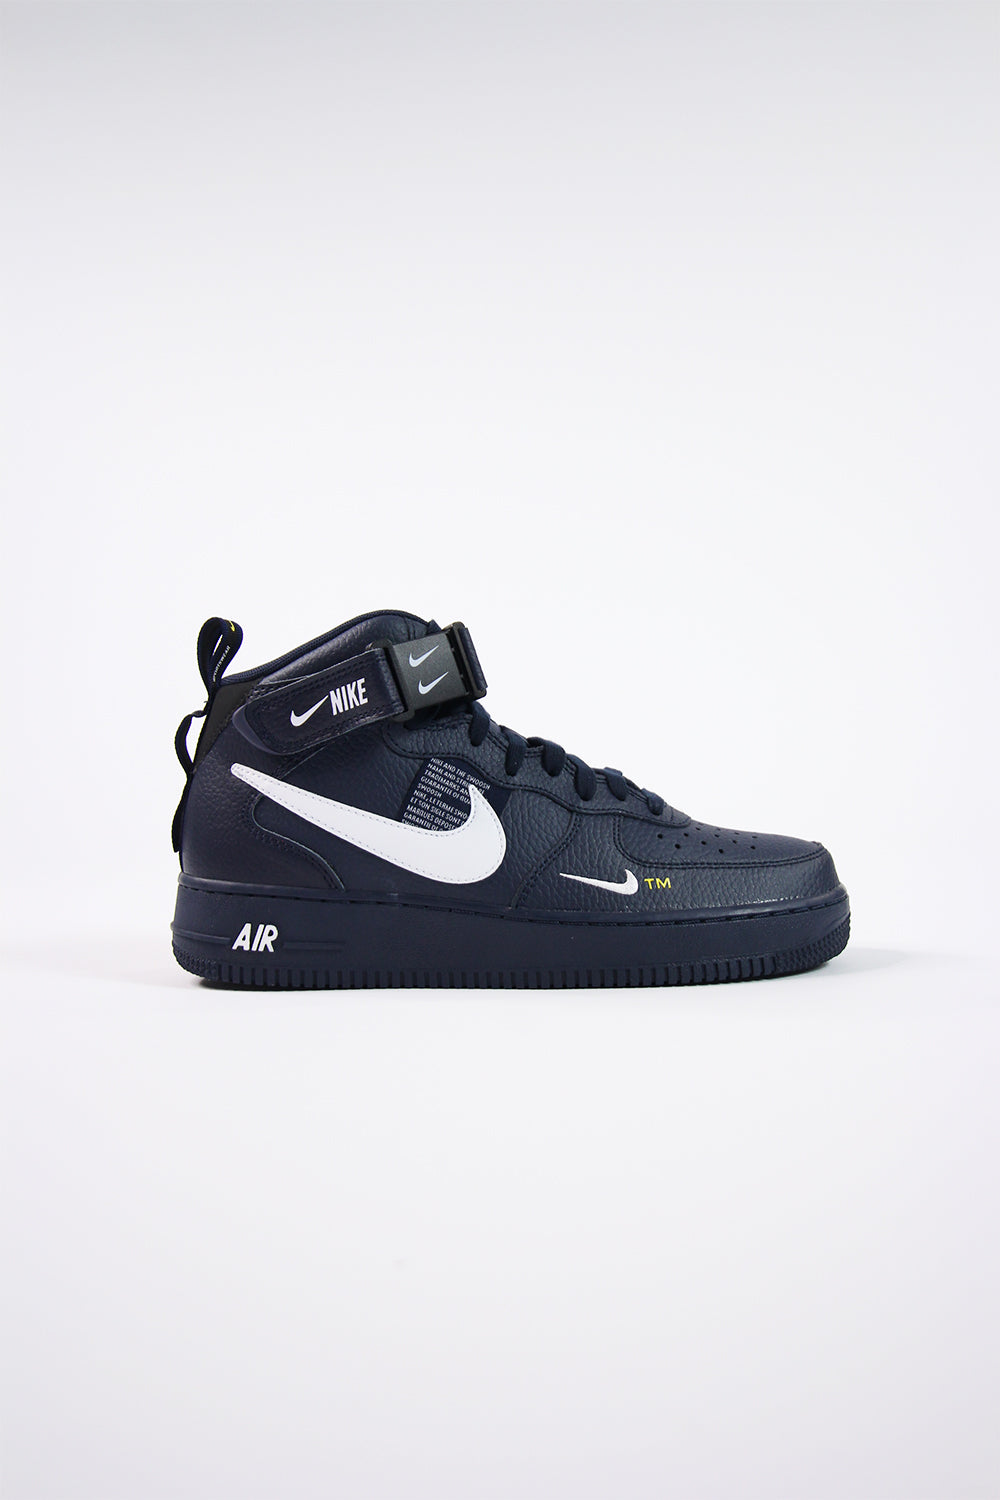 Air Force 1 Mid' 07 LV8 (Obsidian/White 